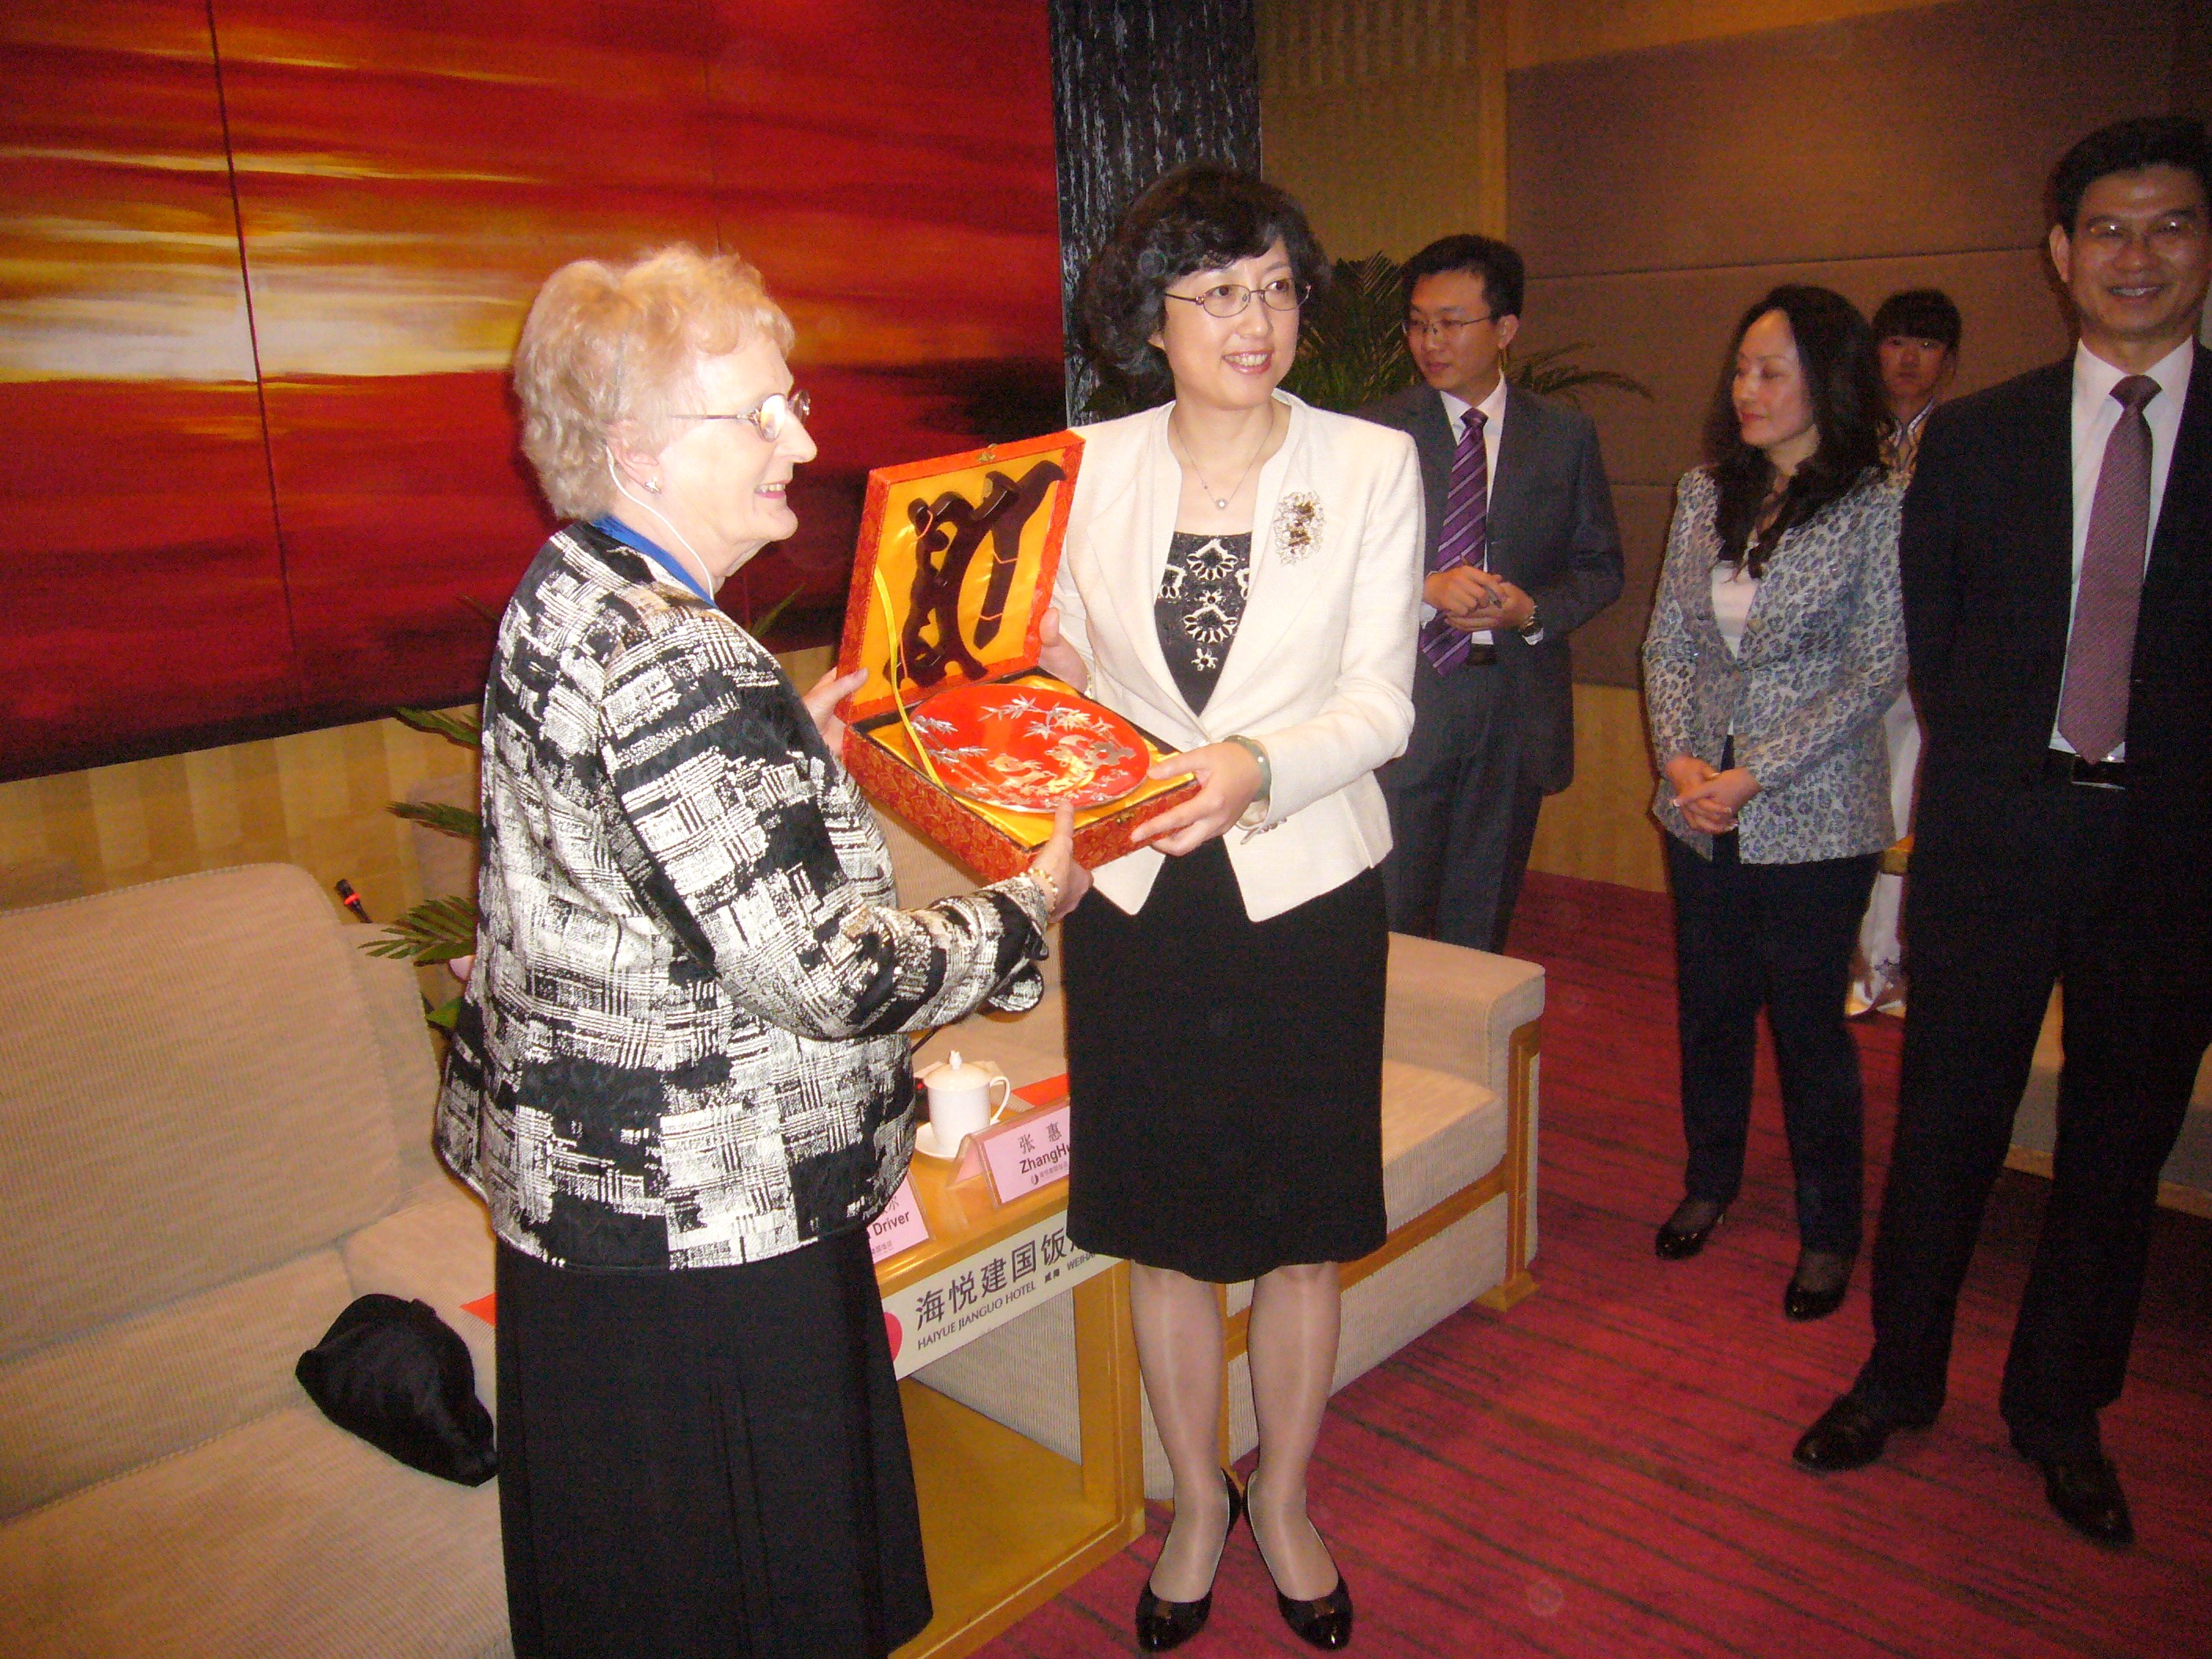 Mayor receiving gift from Weihai official - April 2012